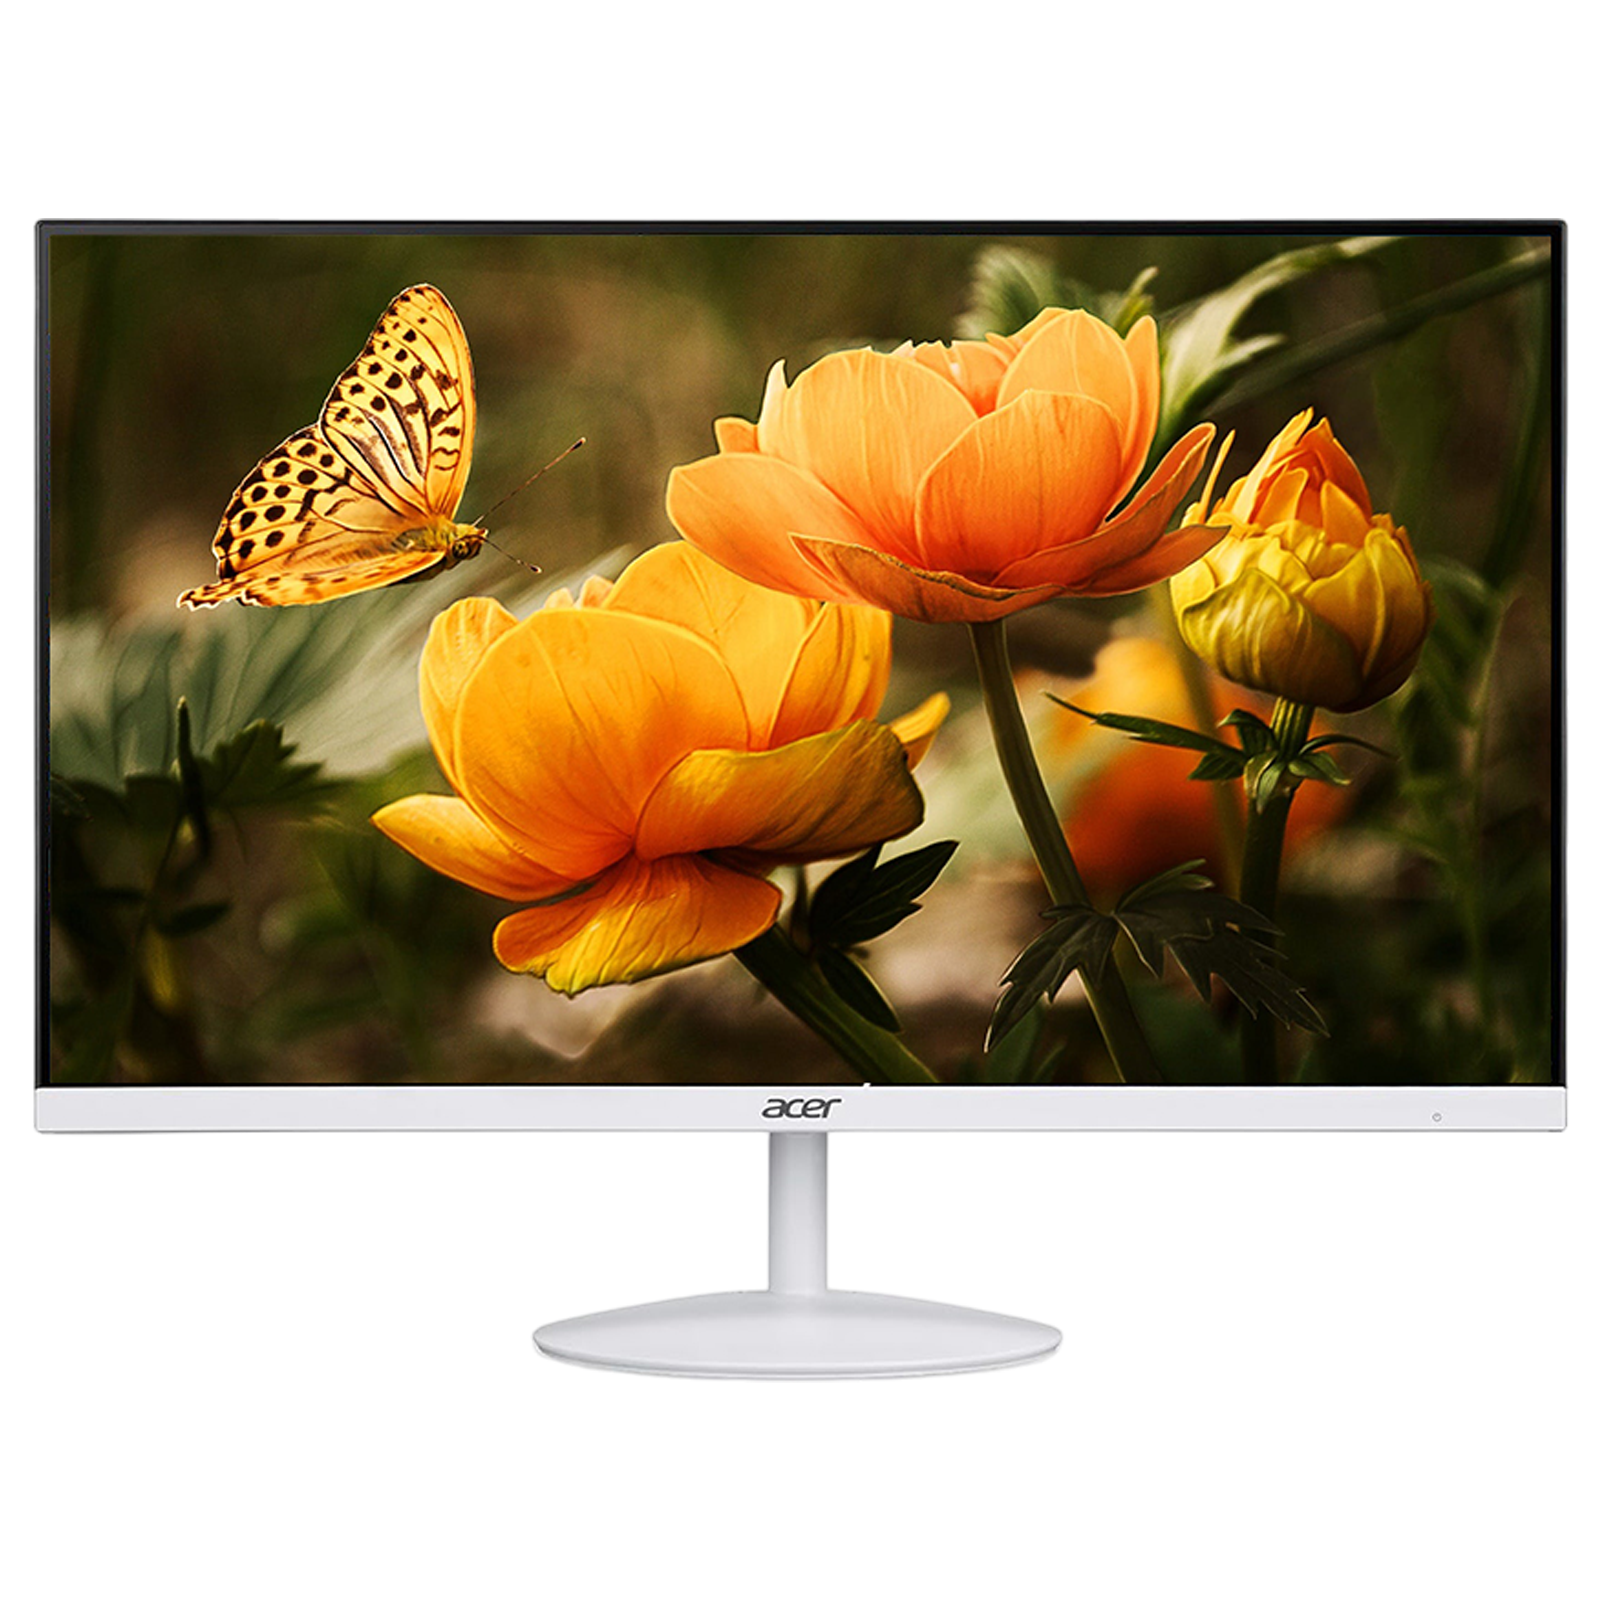 acer SA2 60.45 cm (23.8 inch) Full HD IPS Panel Ultra Thin Monitor with AMD Free Sync